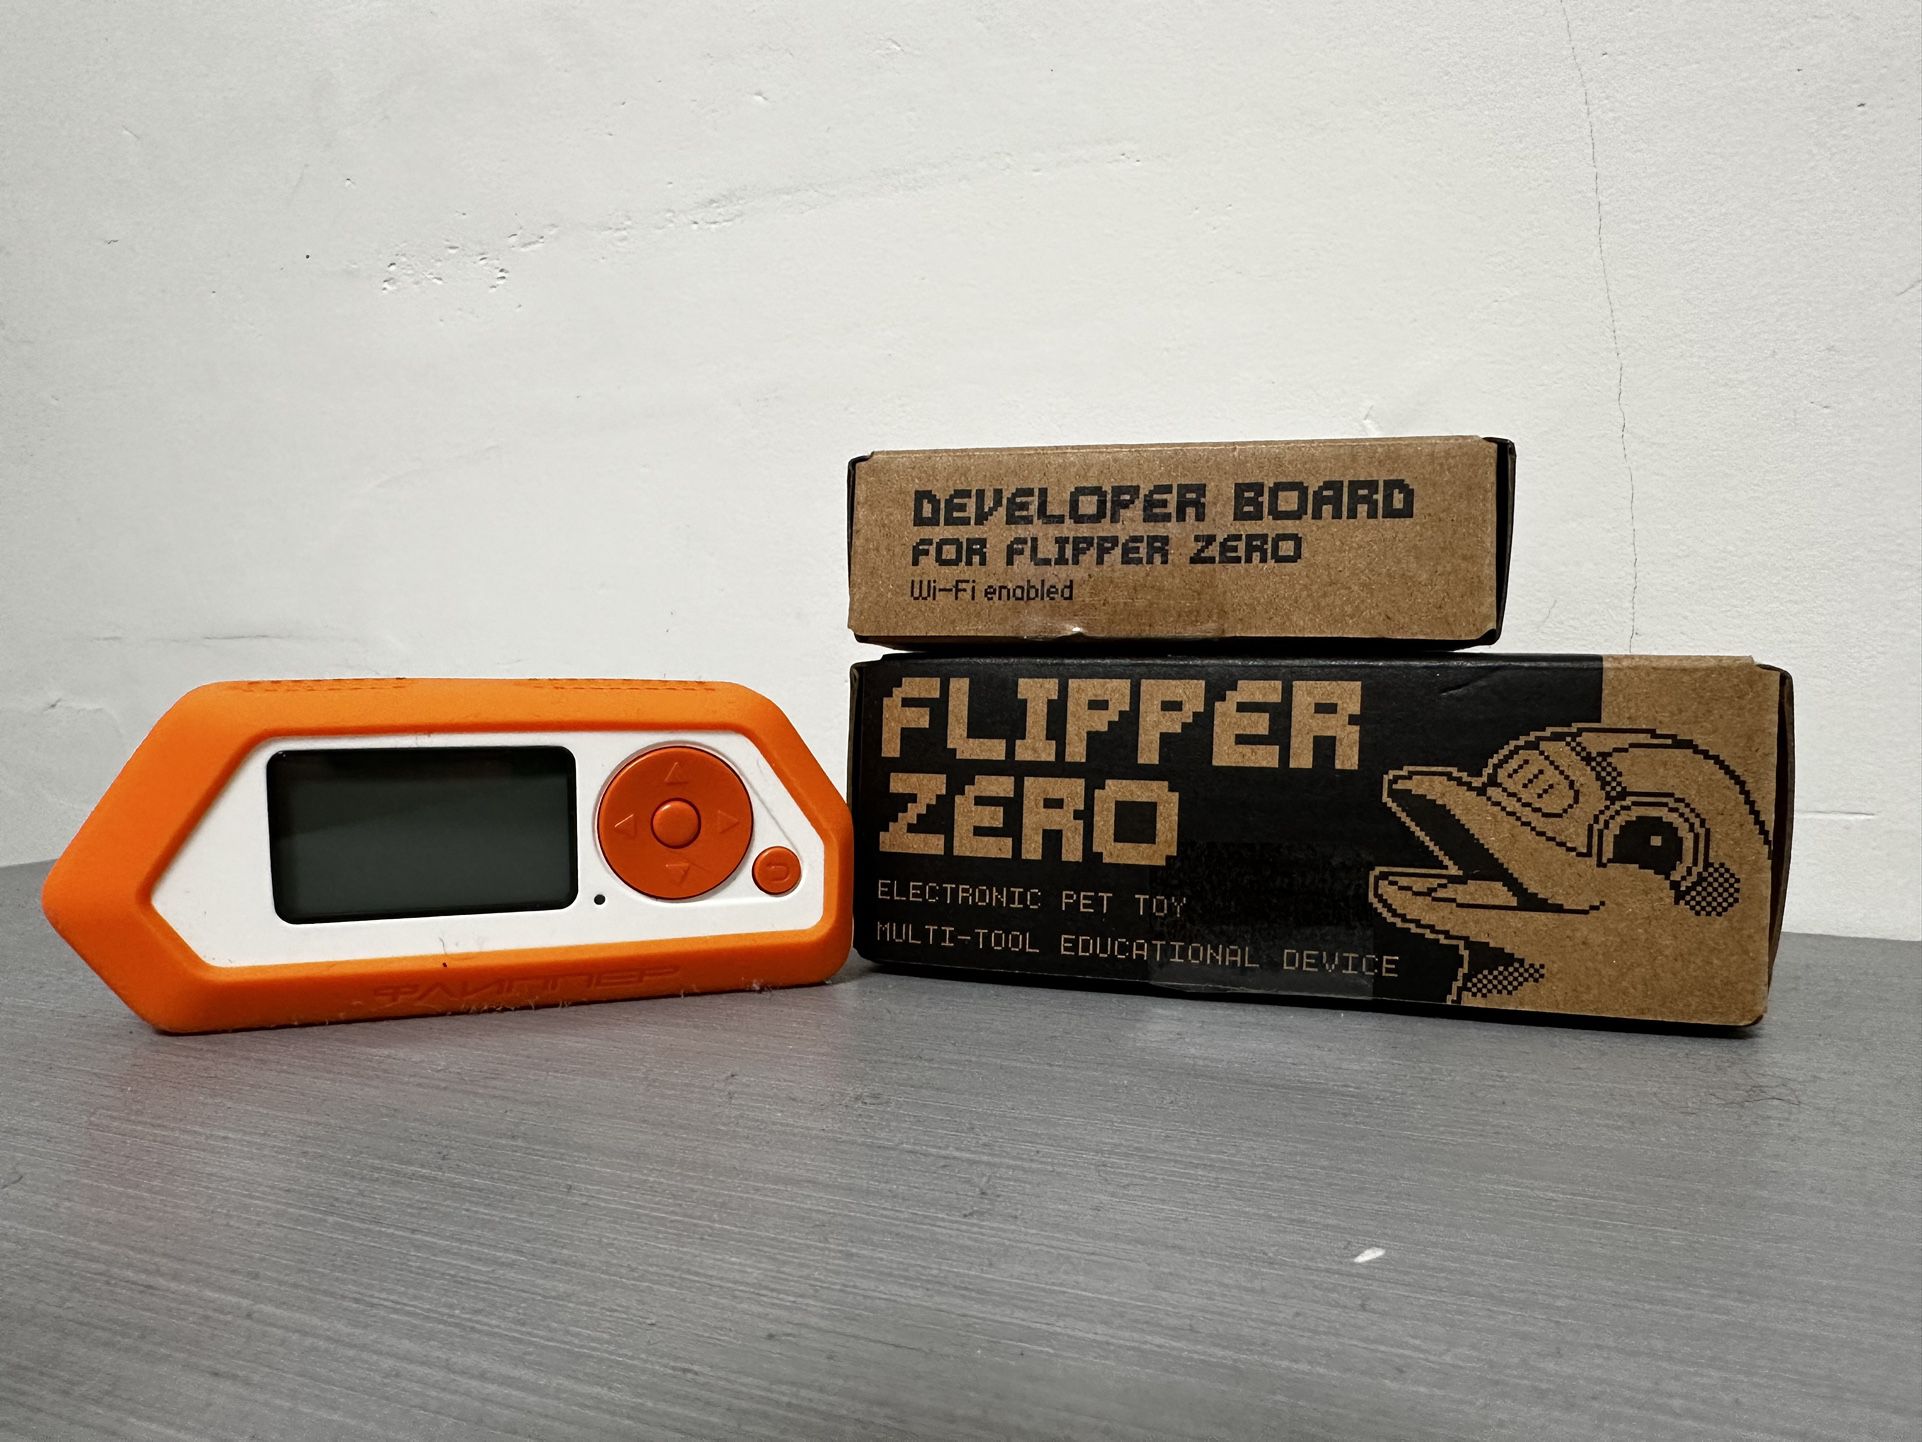 Flipper Zero Brand New Barely Touched